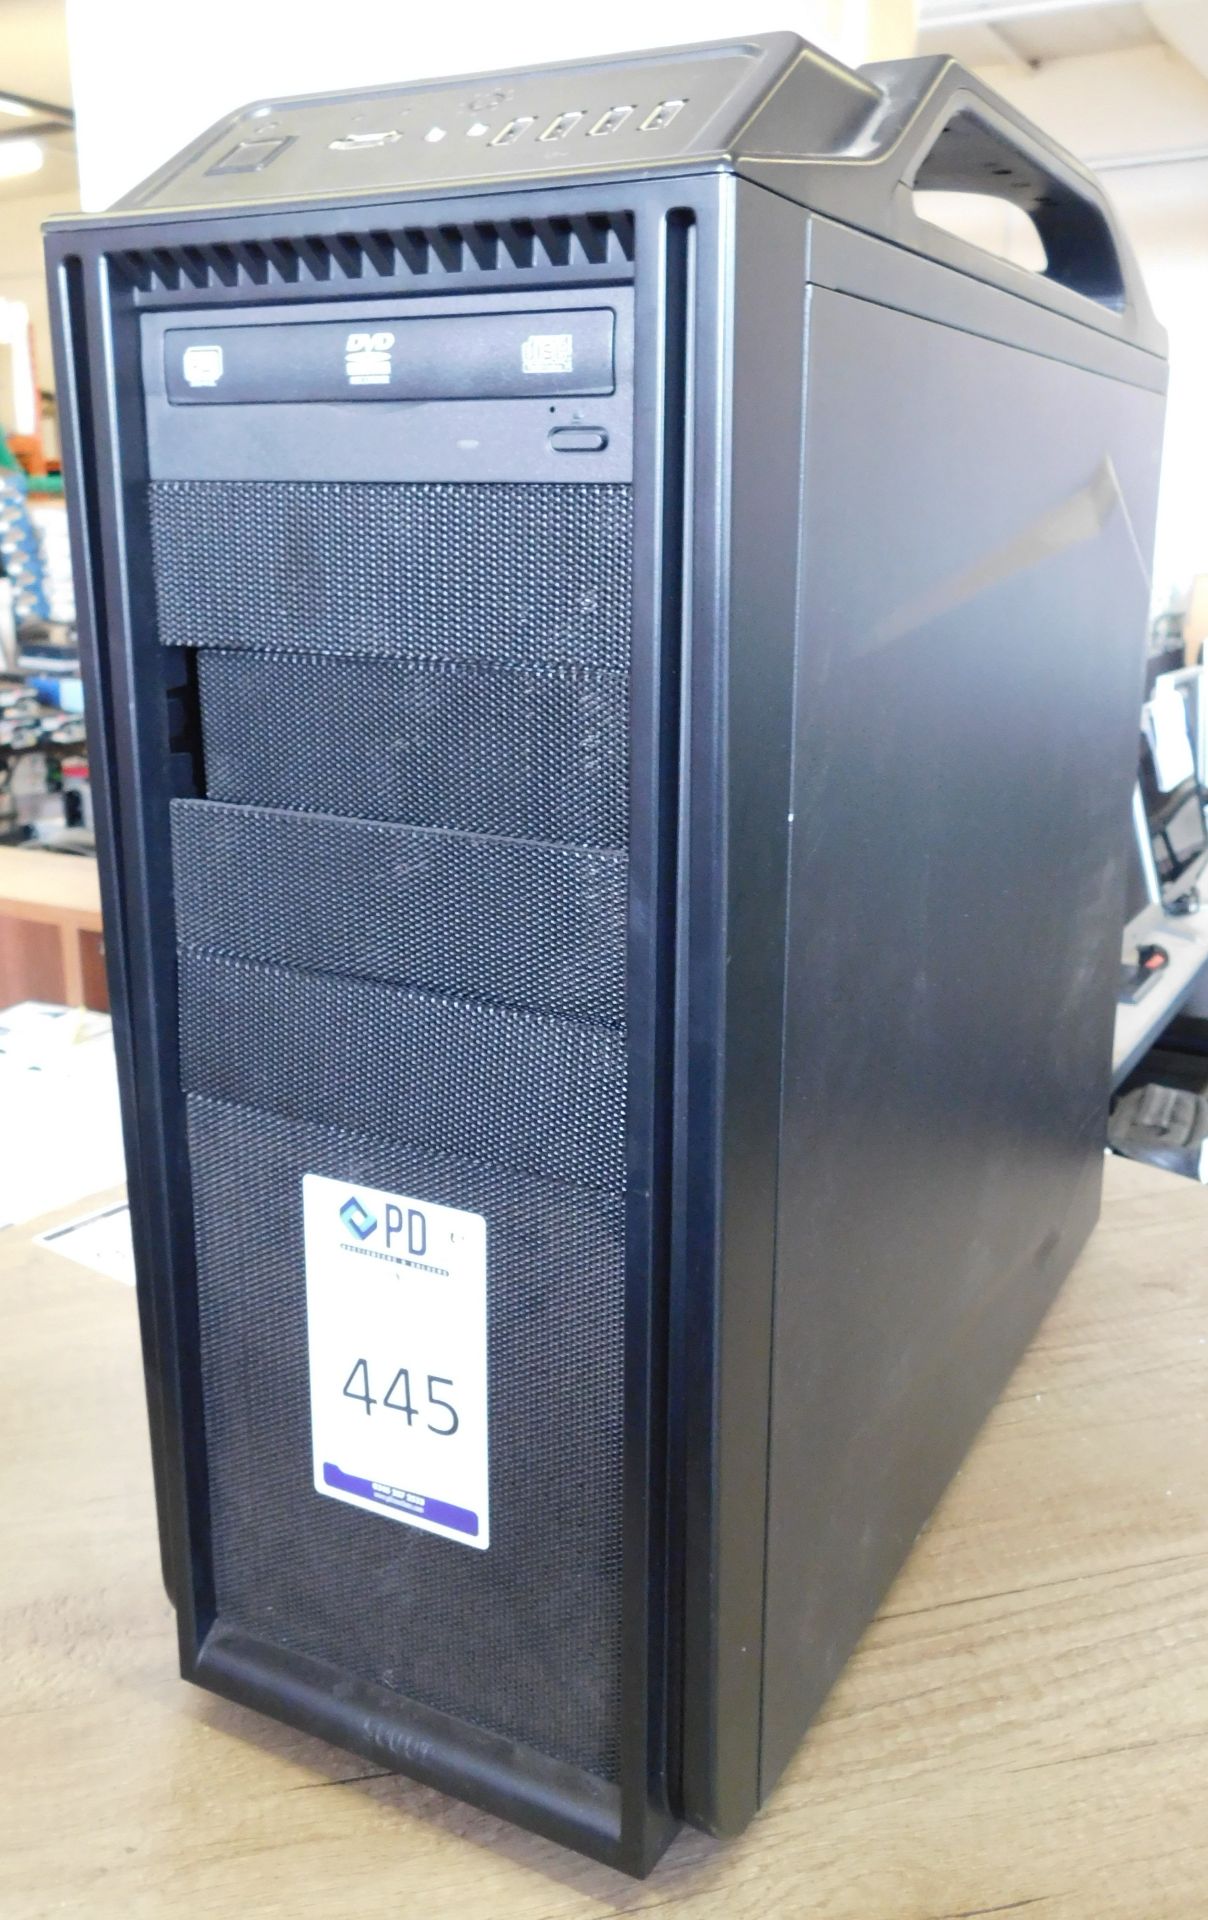 Scout i7 Tower Computer (No HDD) (Location: Stockport. Please Refer to General Notes)